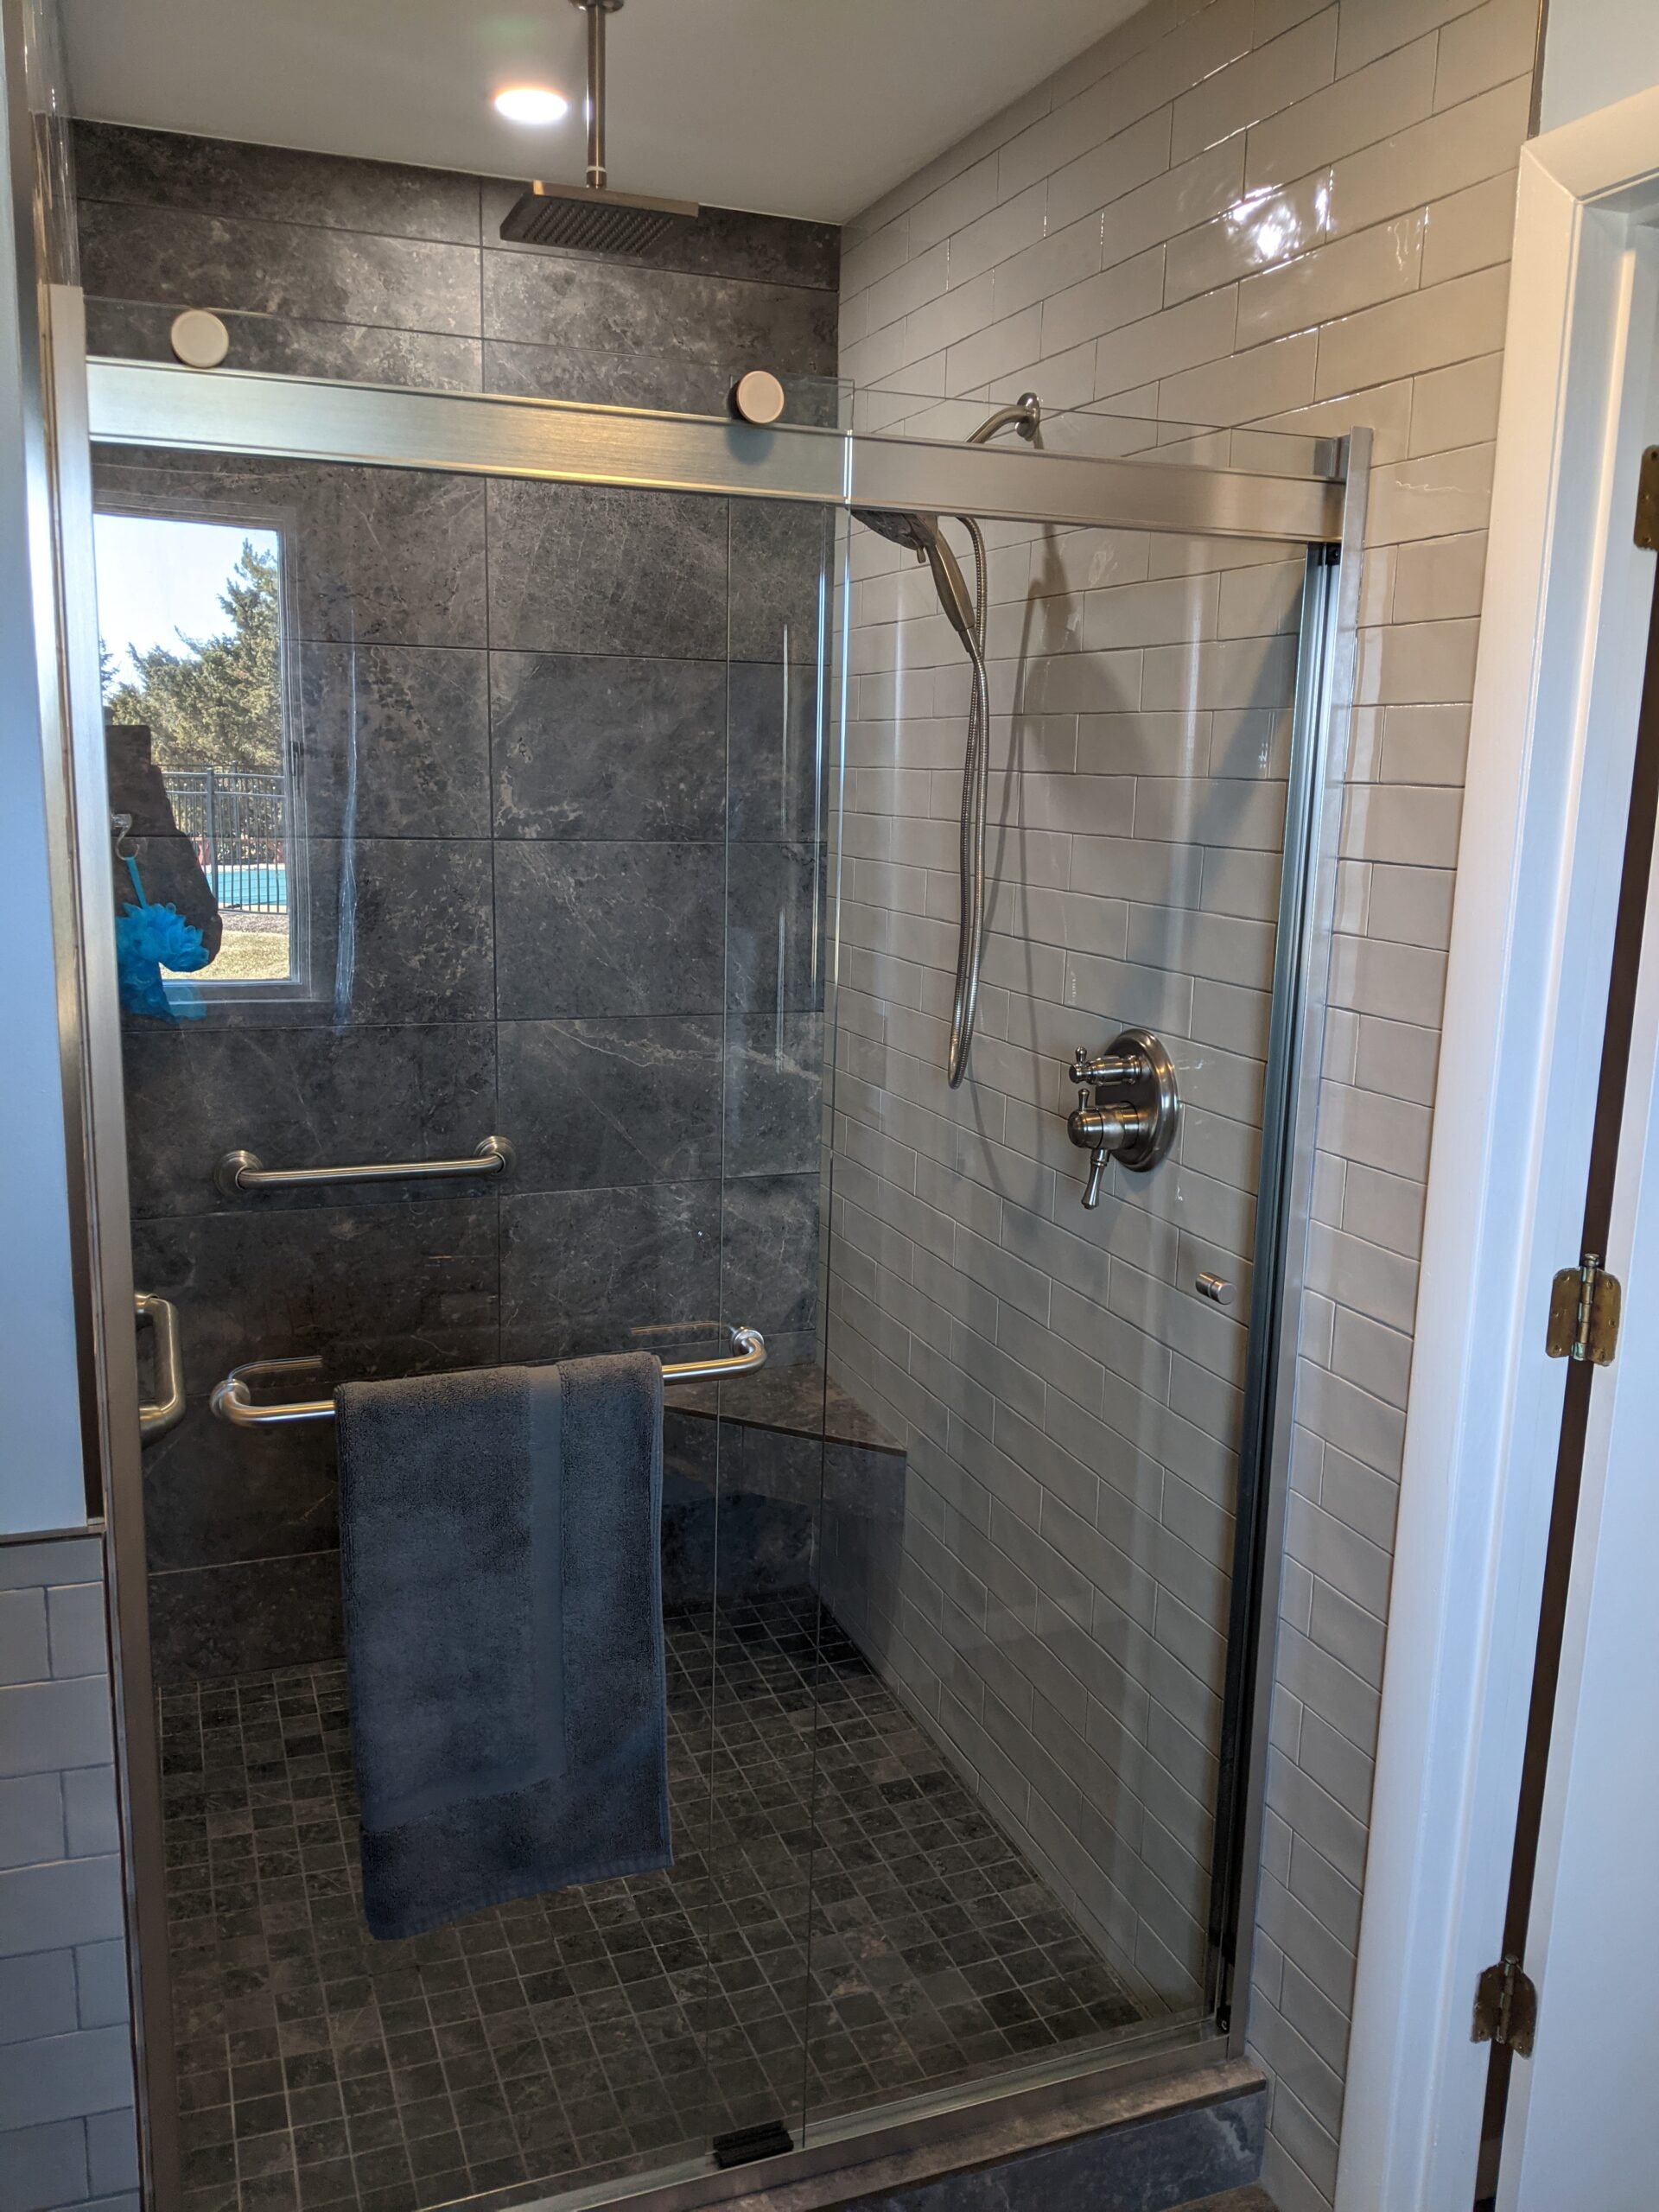 Image showing the new tiled shower.